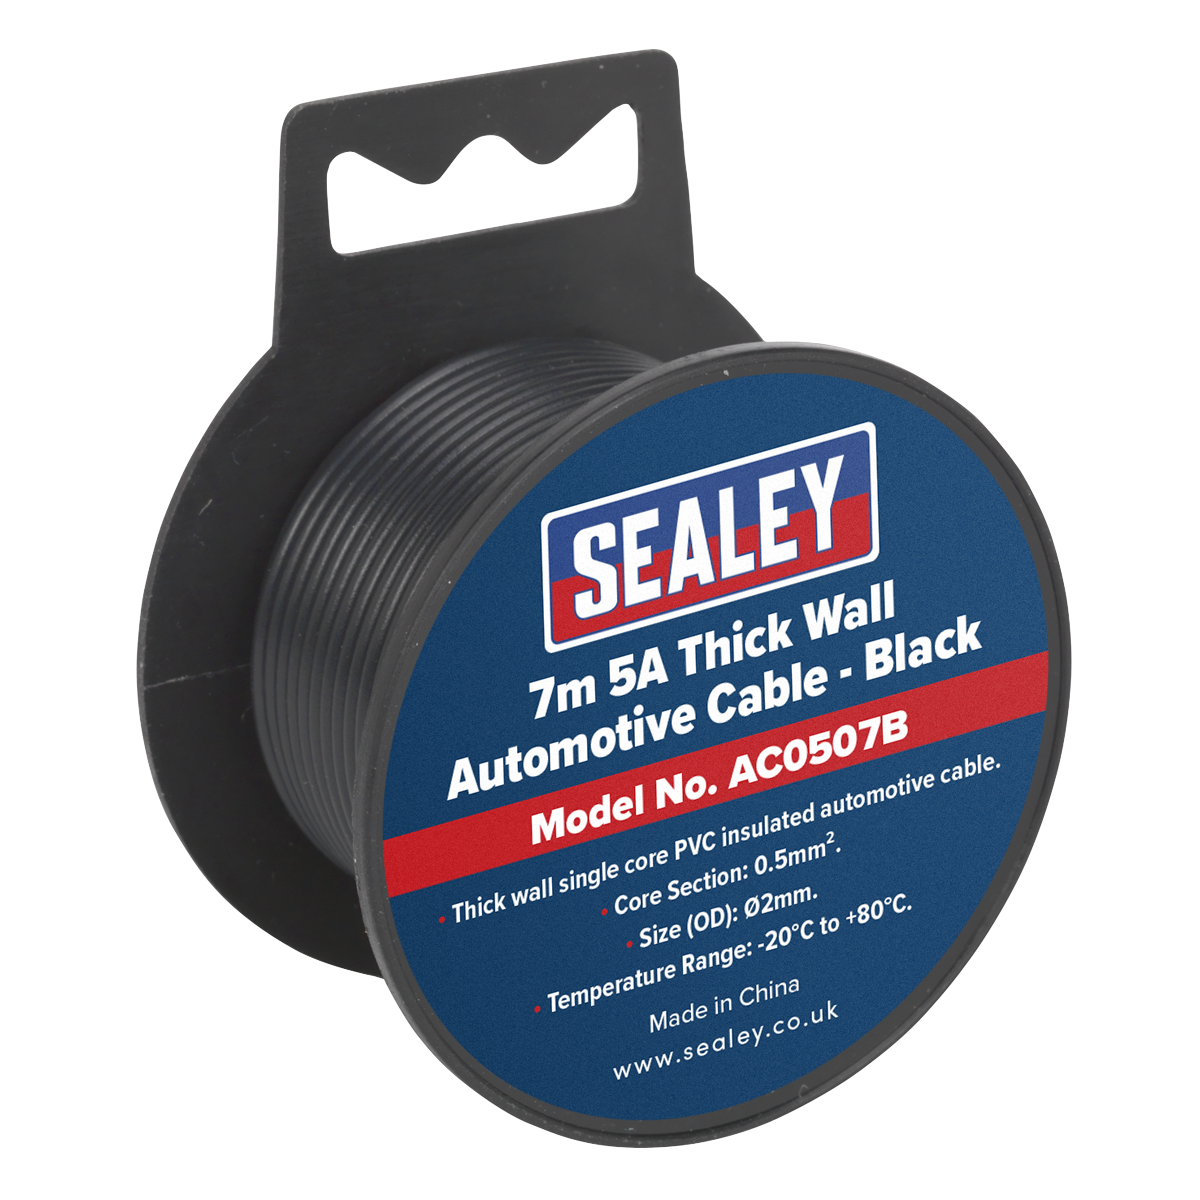 Sealey Automotive Cable Thick Wall 5A 7m Black